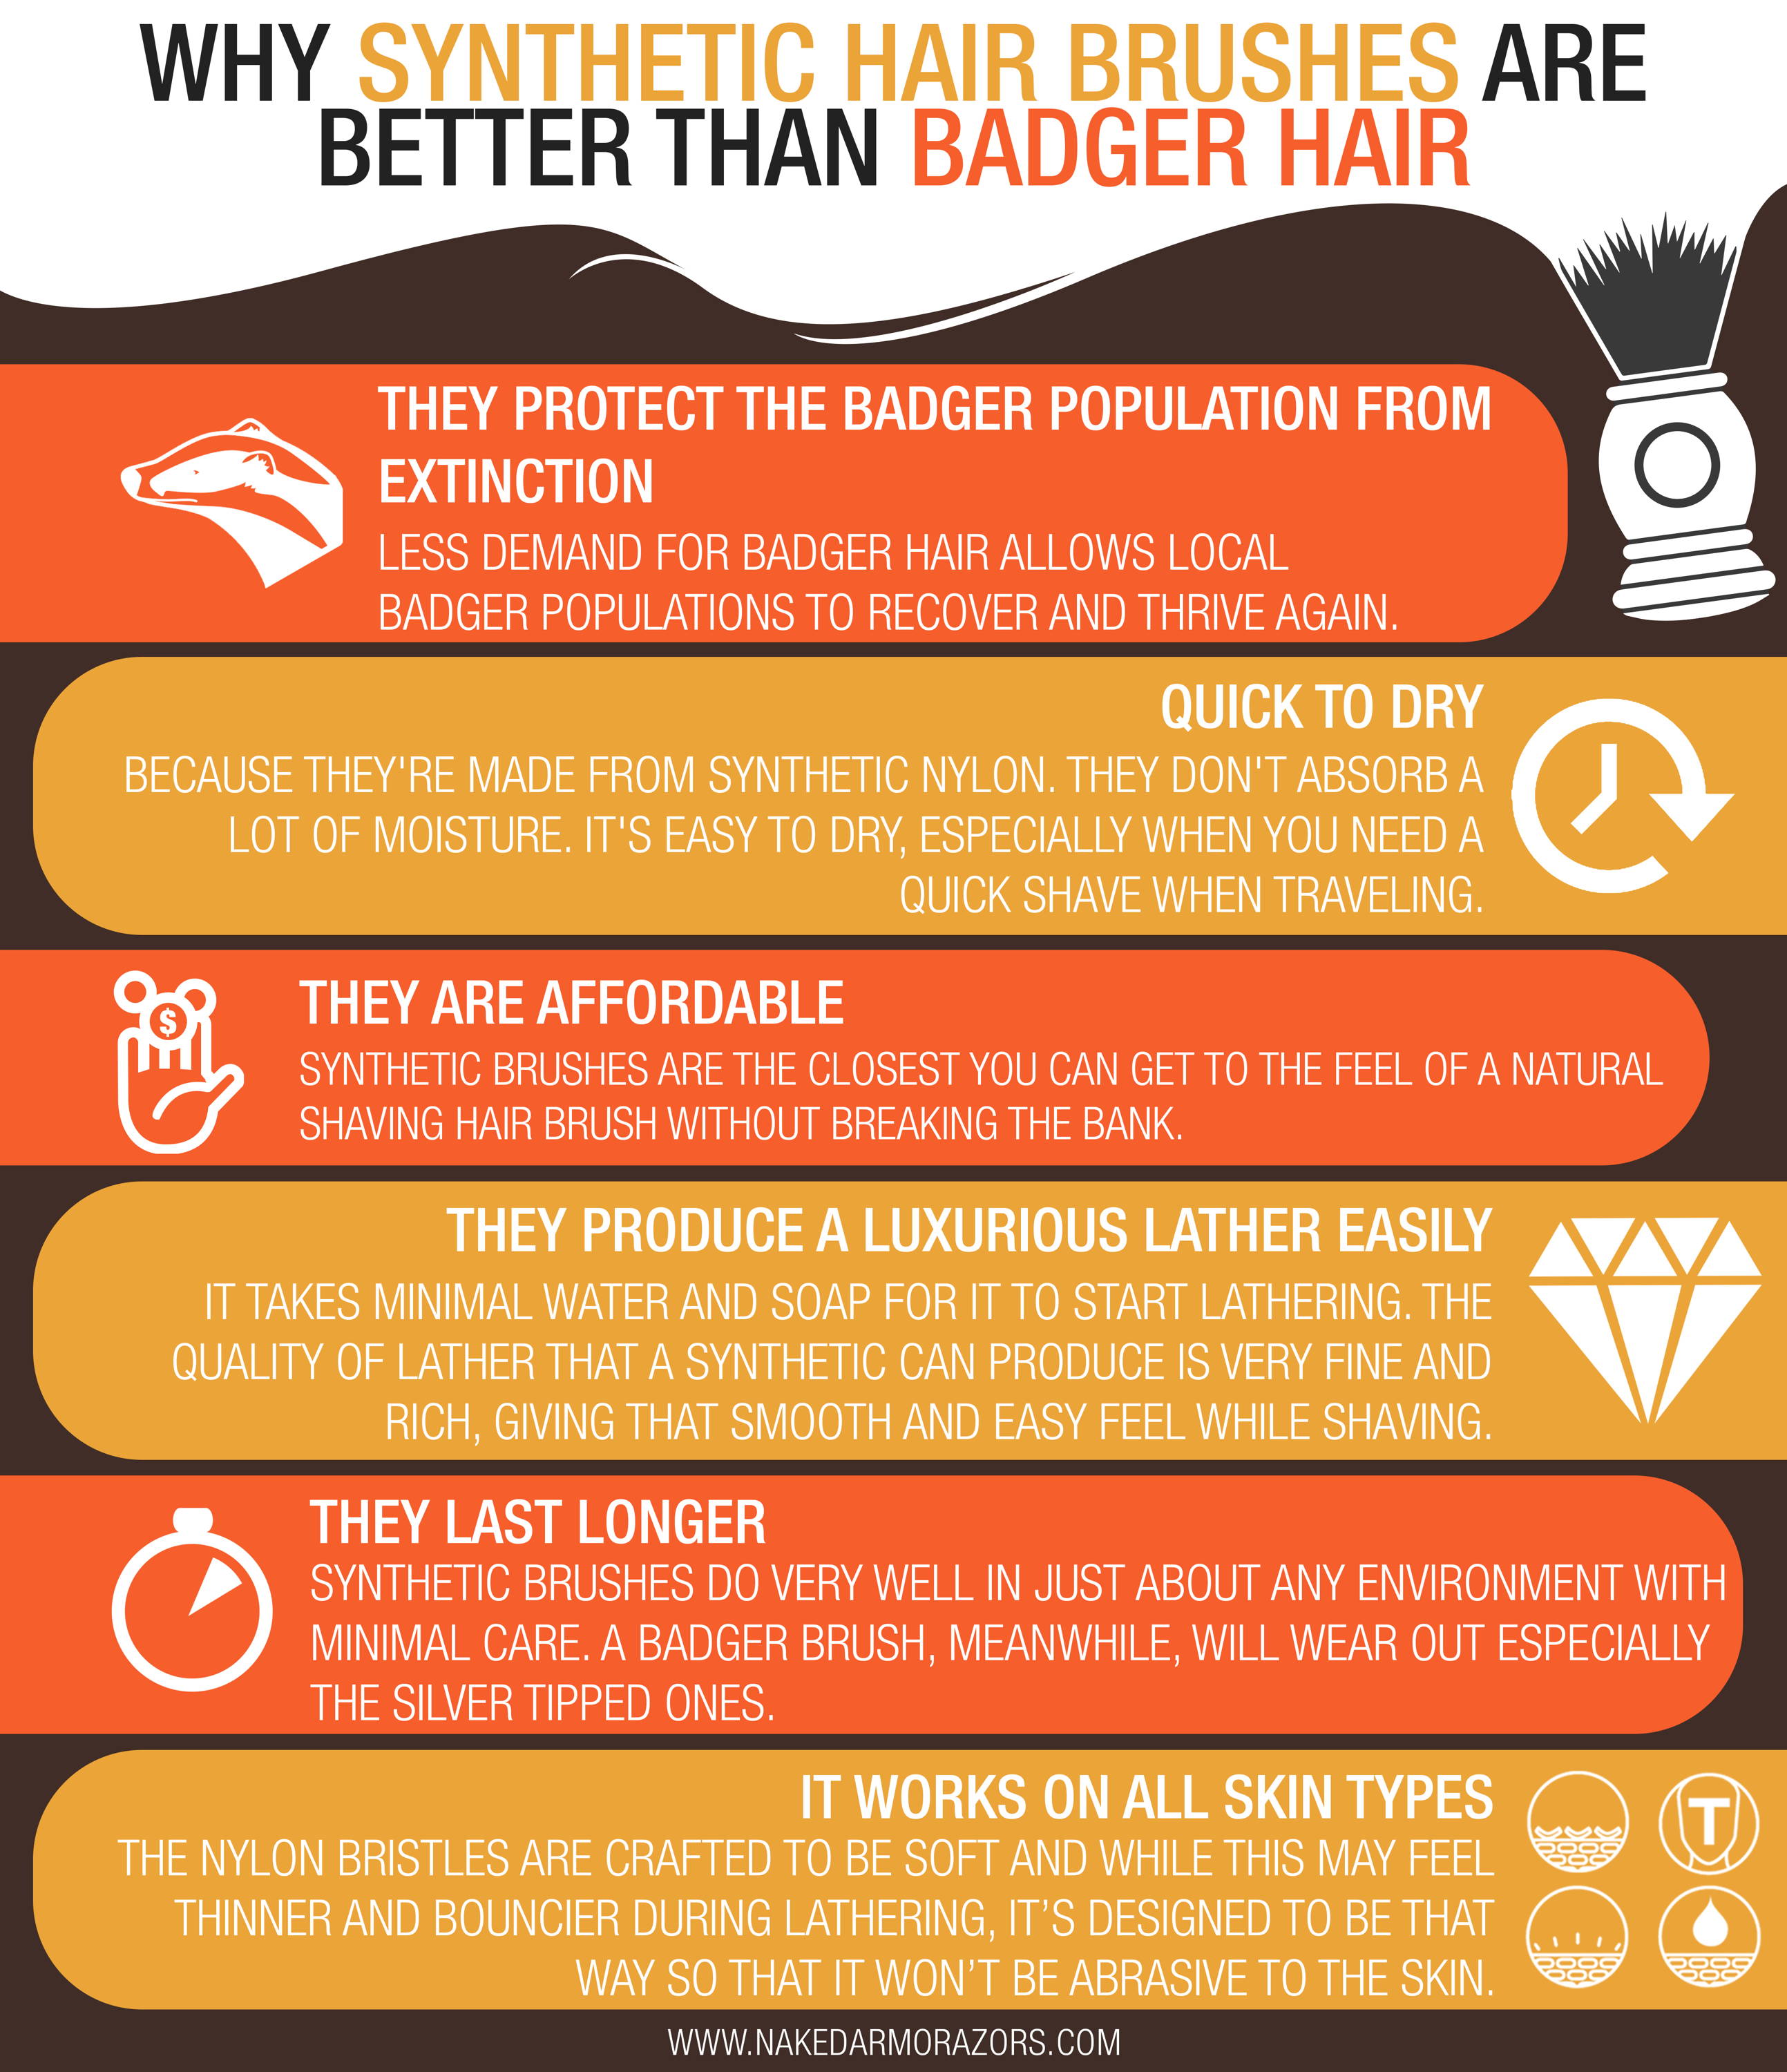 What Are The Advantages Of Using A Shaving Brush?